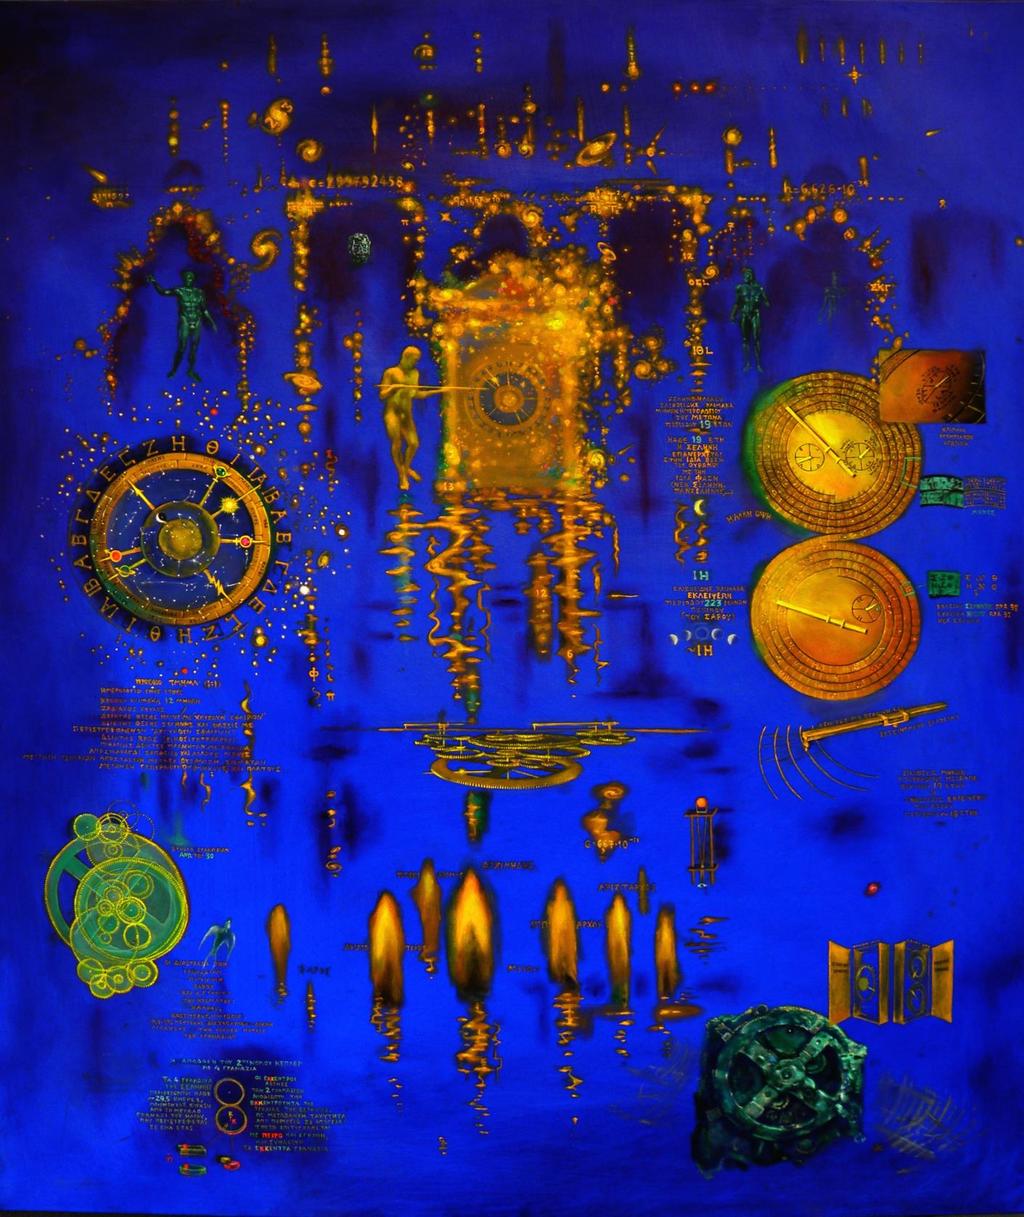 Antikythera Mechanism painting by Mrs Evi Sarantea, now at the National